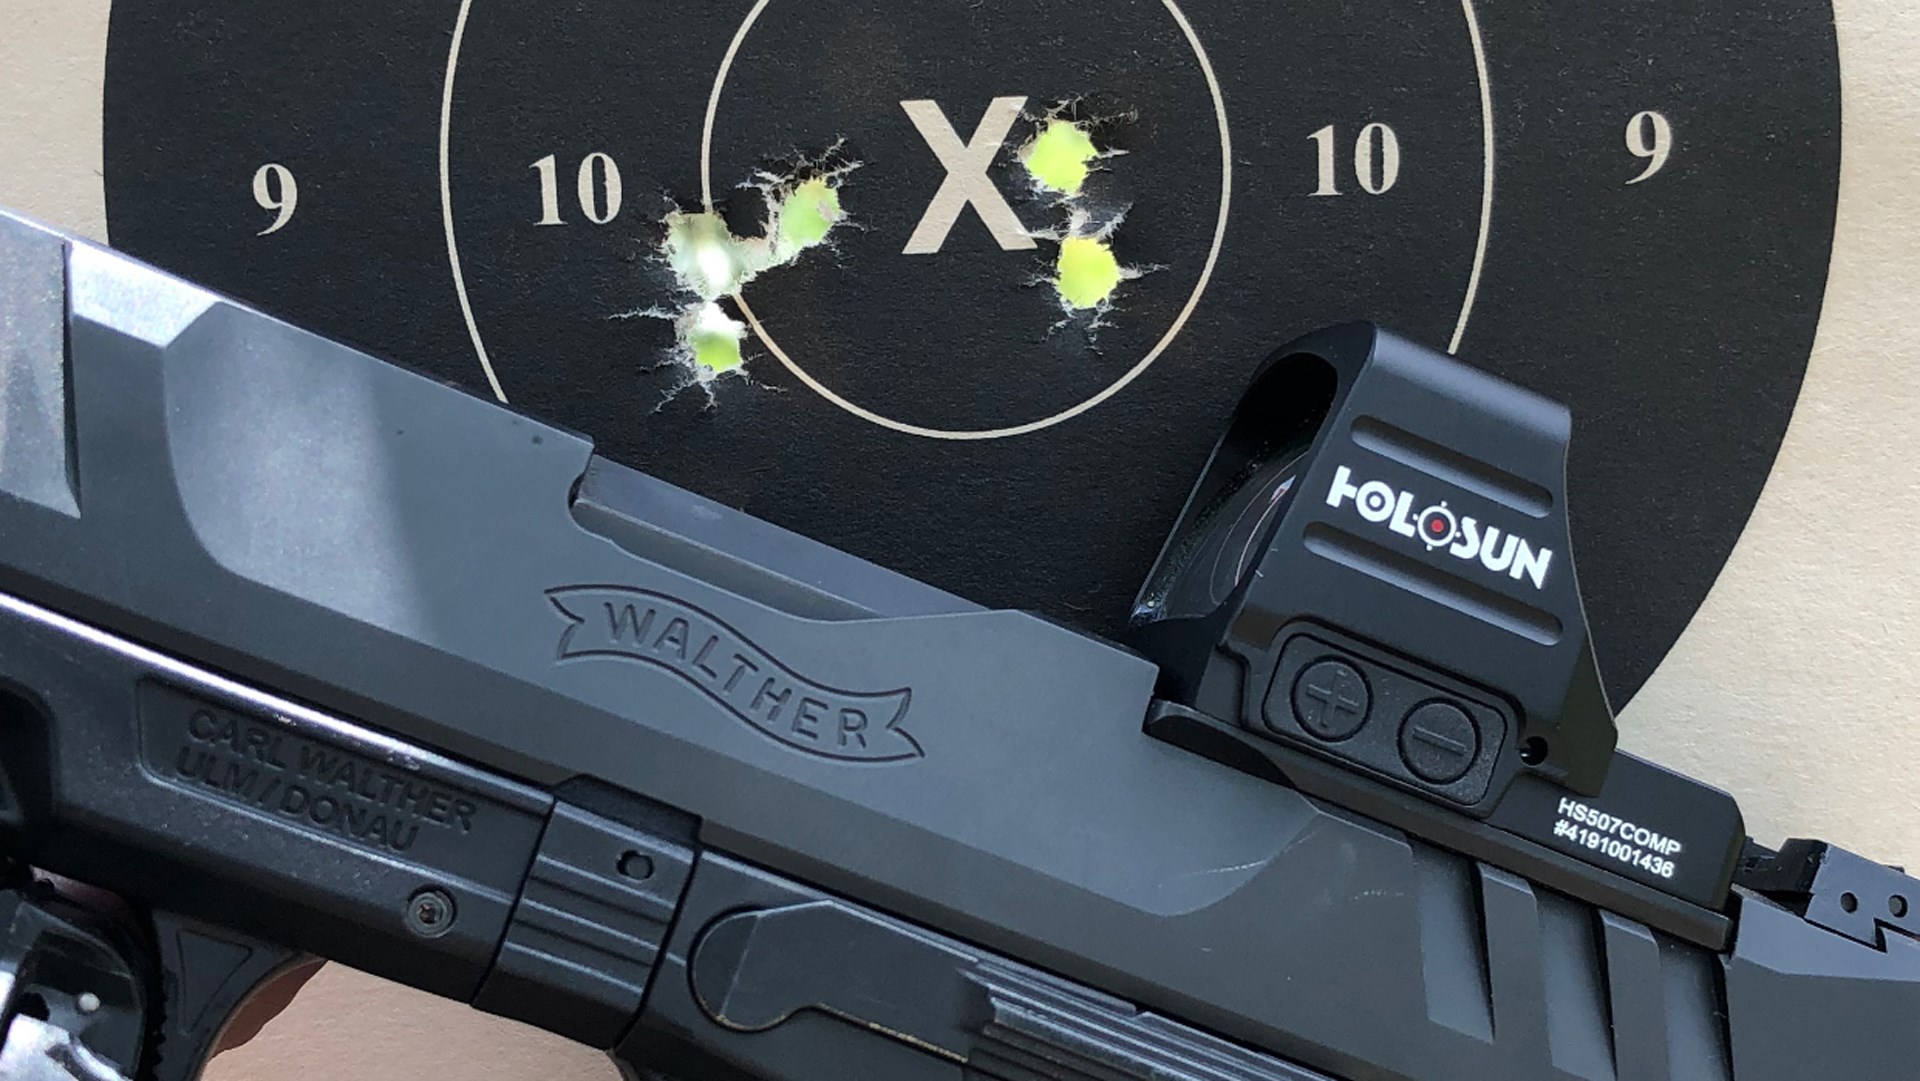 Walther pistol with Holosun 507 Comp red-dot optic attached in front of bullseye target holes X numbers rings